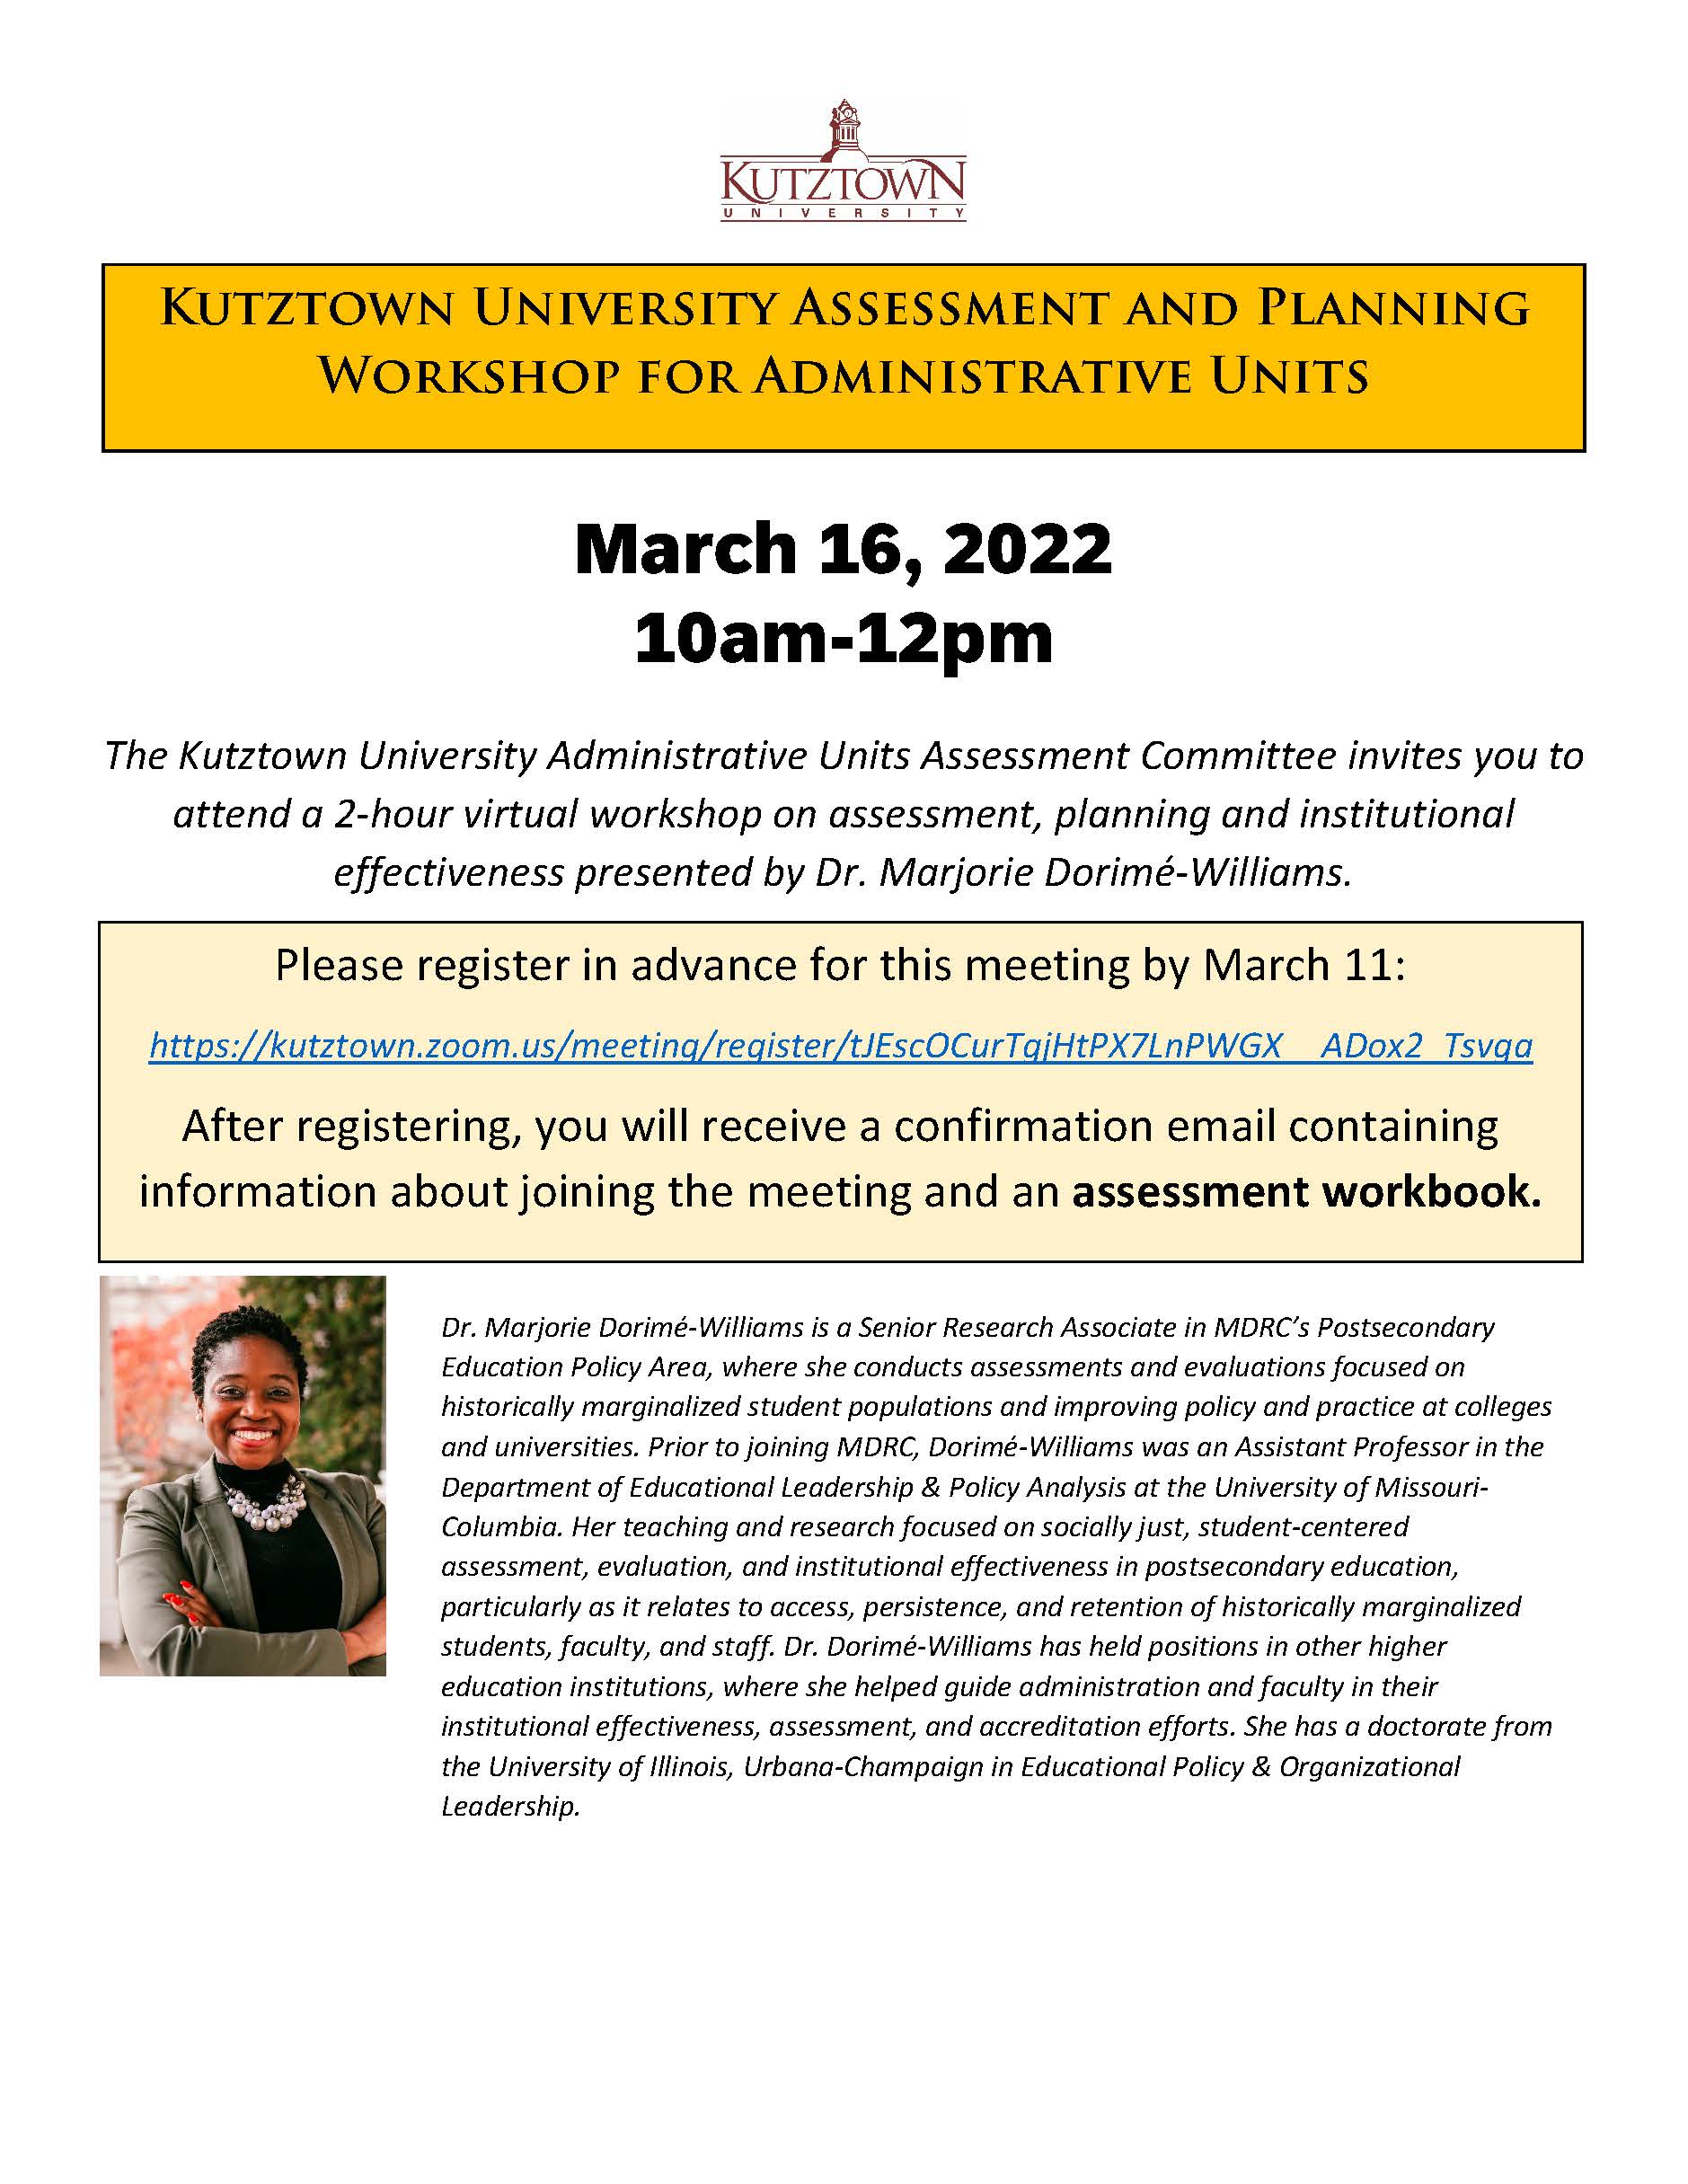 KU assessment and planning workshop for administrative units, presented by Marjorie Dorime-Williams, on March 16, 2022 from 10 am to 12 pm. Registration ends on March 11th.  